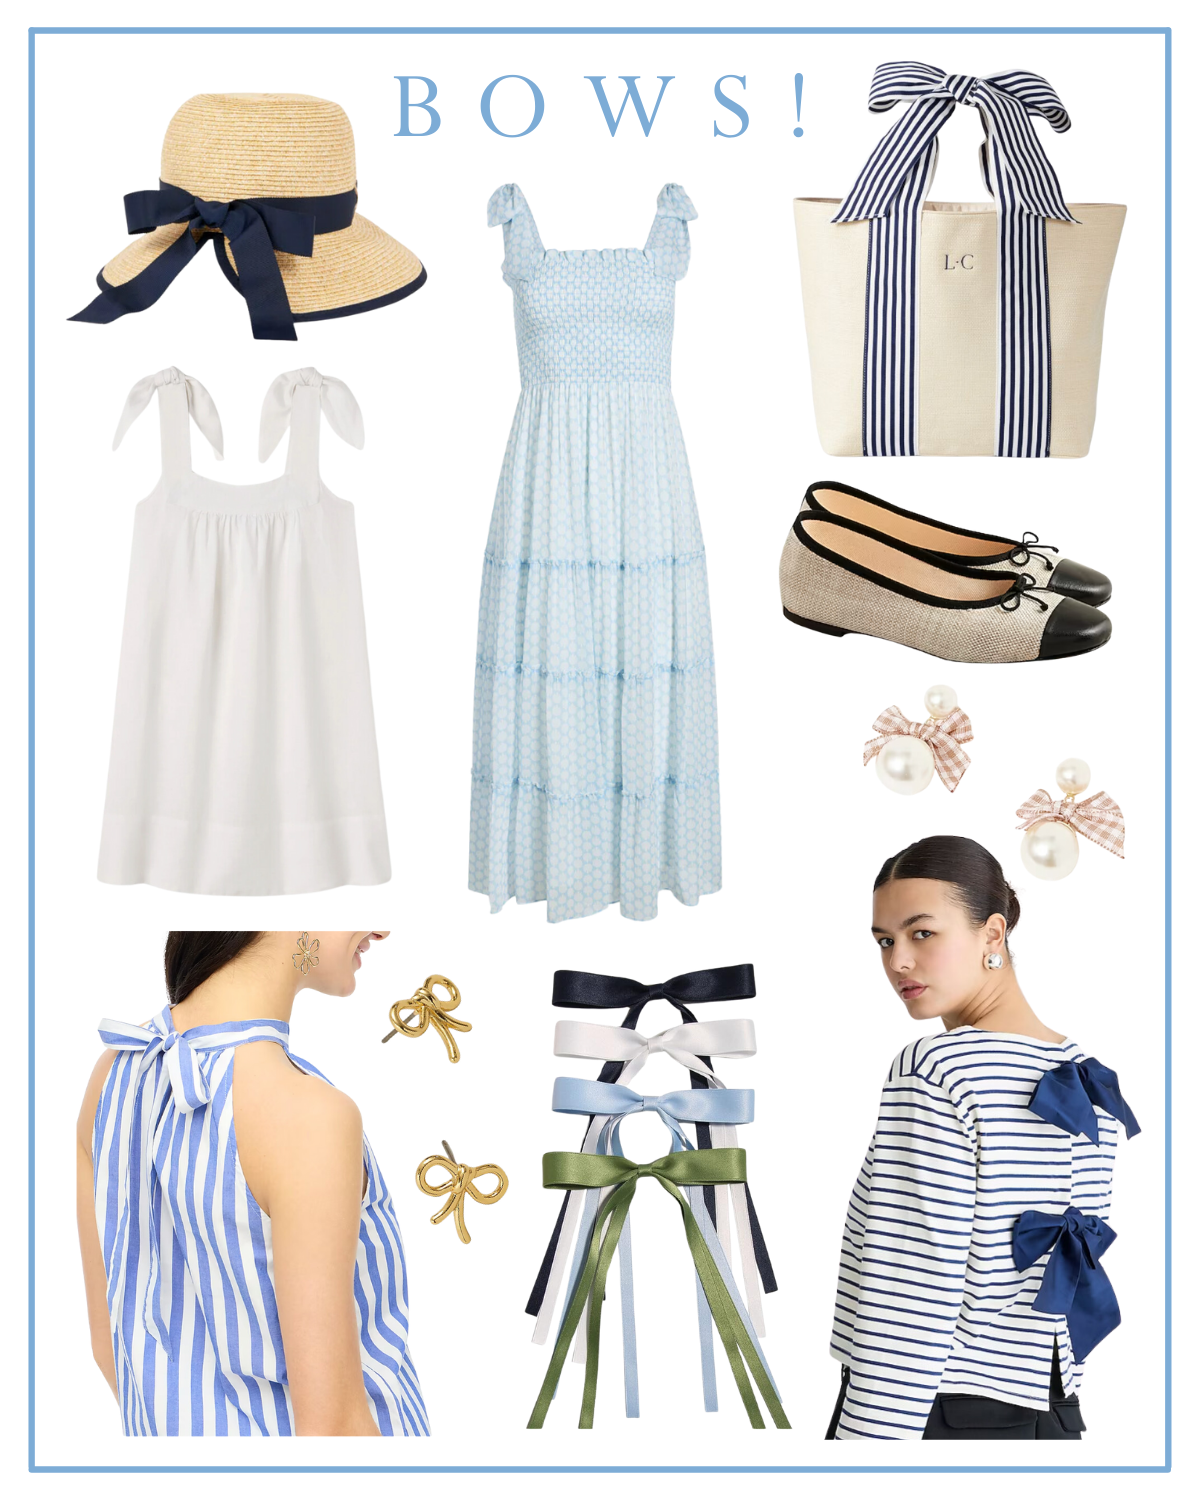 the bow trend: packable talbots sun hat, hill house home nap dress, mark & graham monogrammed tote, j.crew cap toe ballet flats, j.crew factory striped halter top, madewell gold studs, amazon bow clips, and j.crew striped shirt with bows